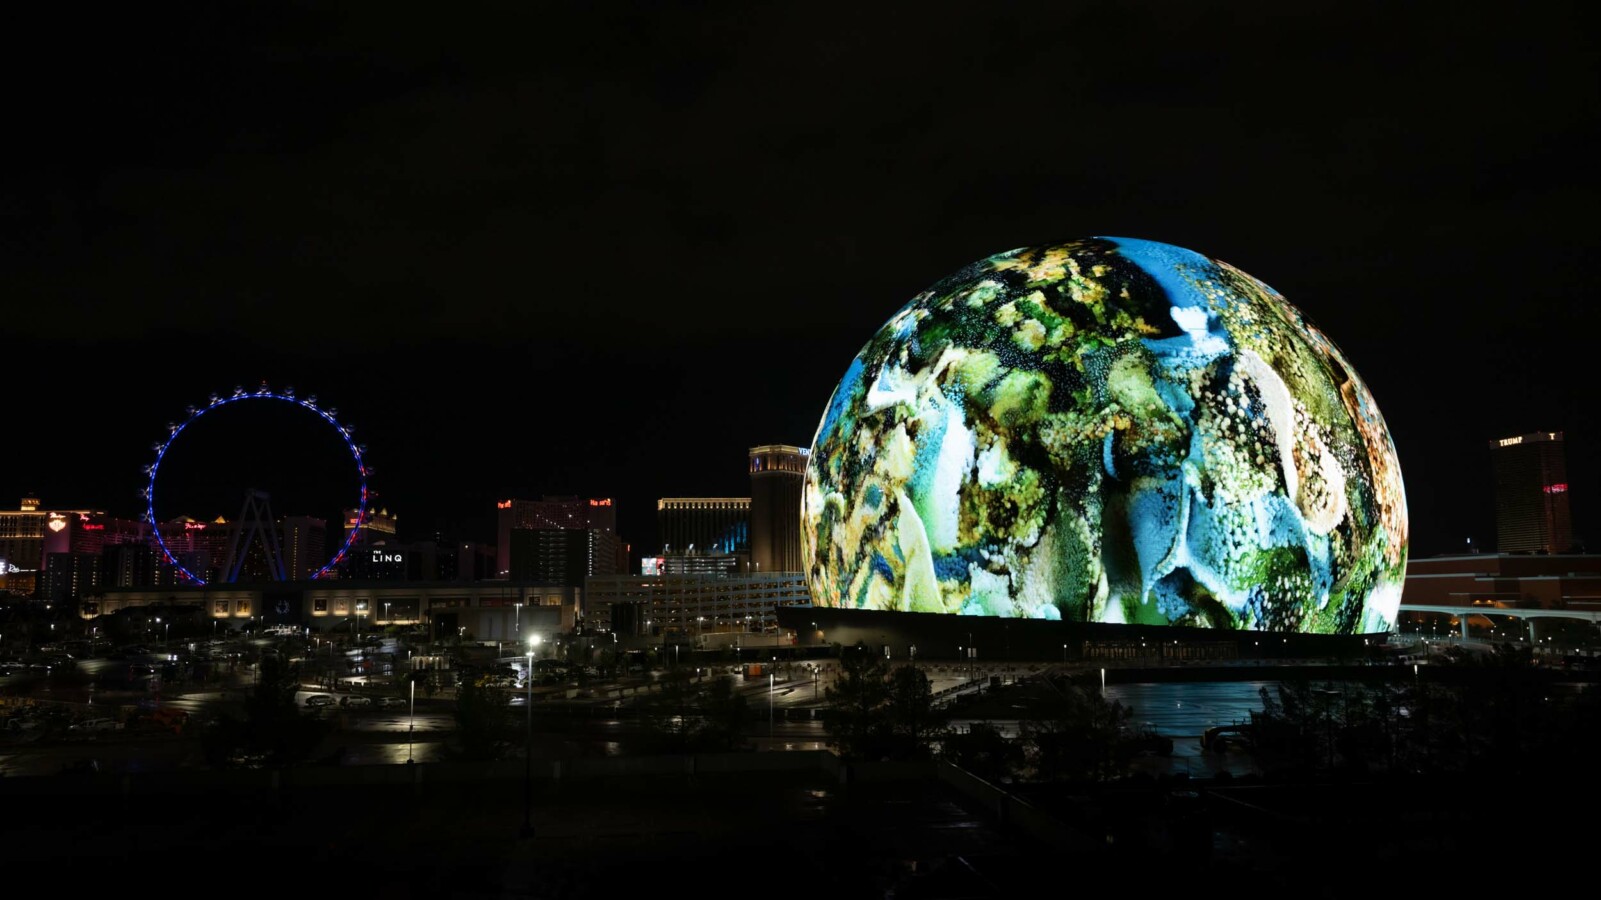 Refik Anadol lights up MSG’s Las Vegas sphere with collages